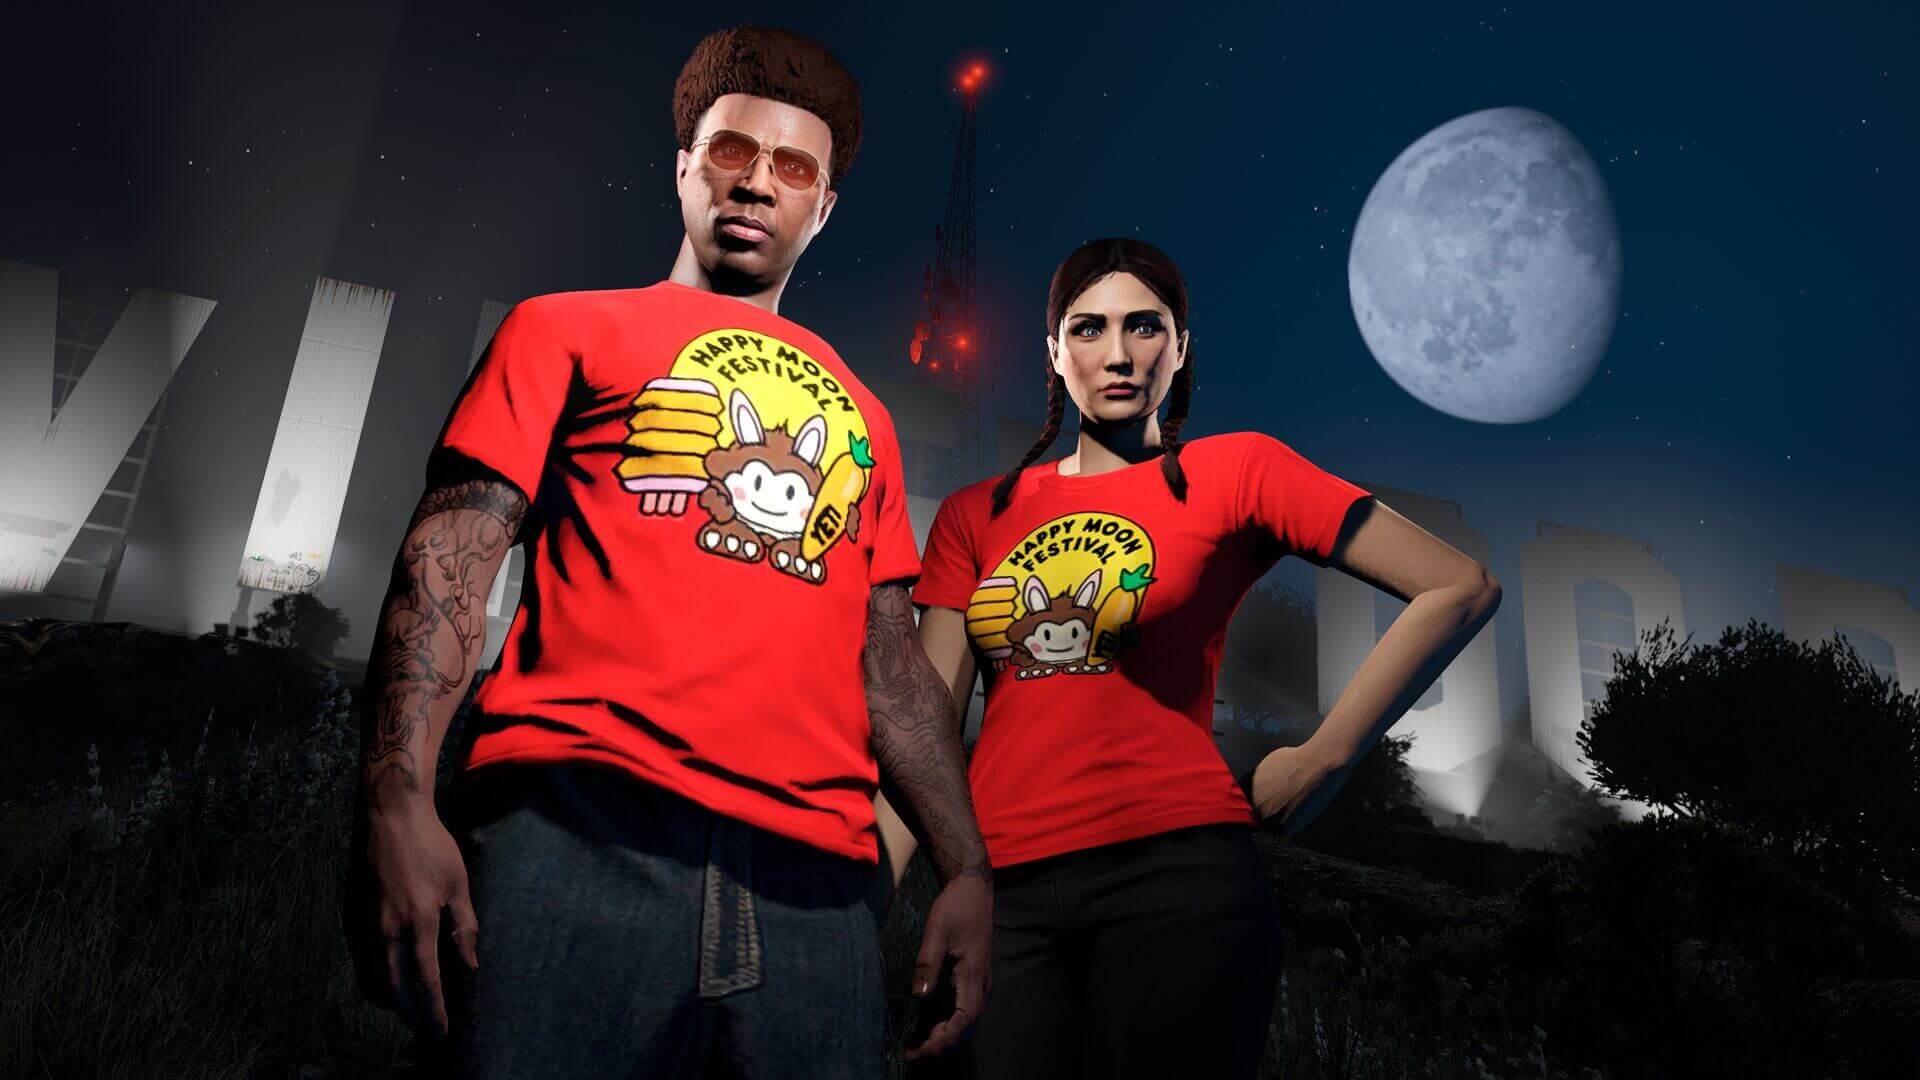 Play GTA Online anytime this week to get the Red Happy Moon Tee and join the festivities